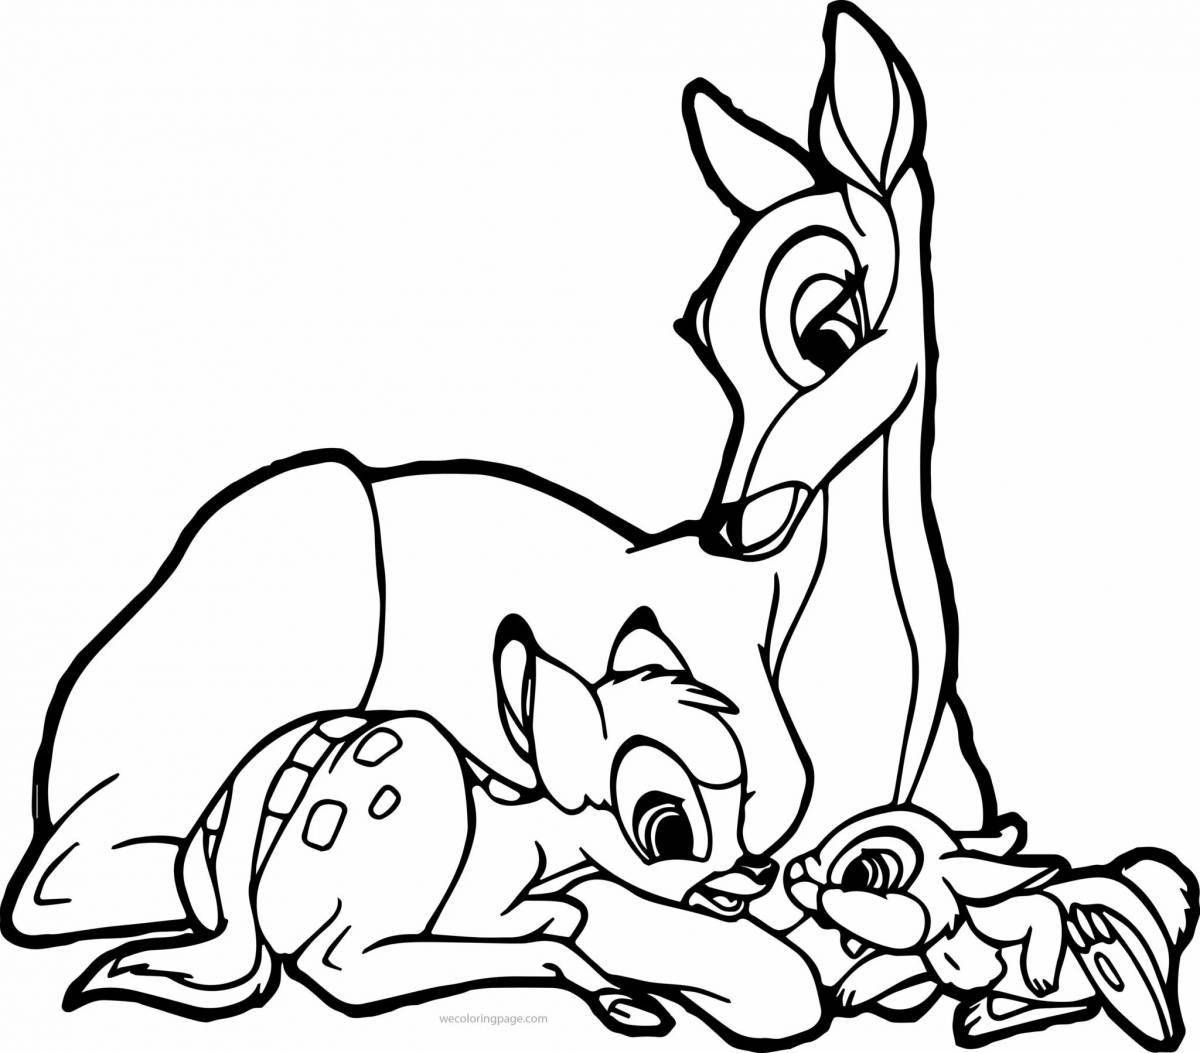 Coloring page gorgeous bambi fawn